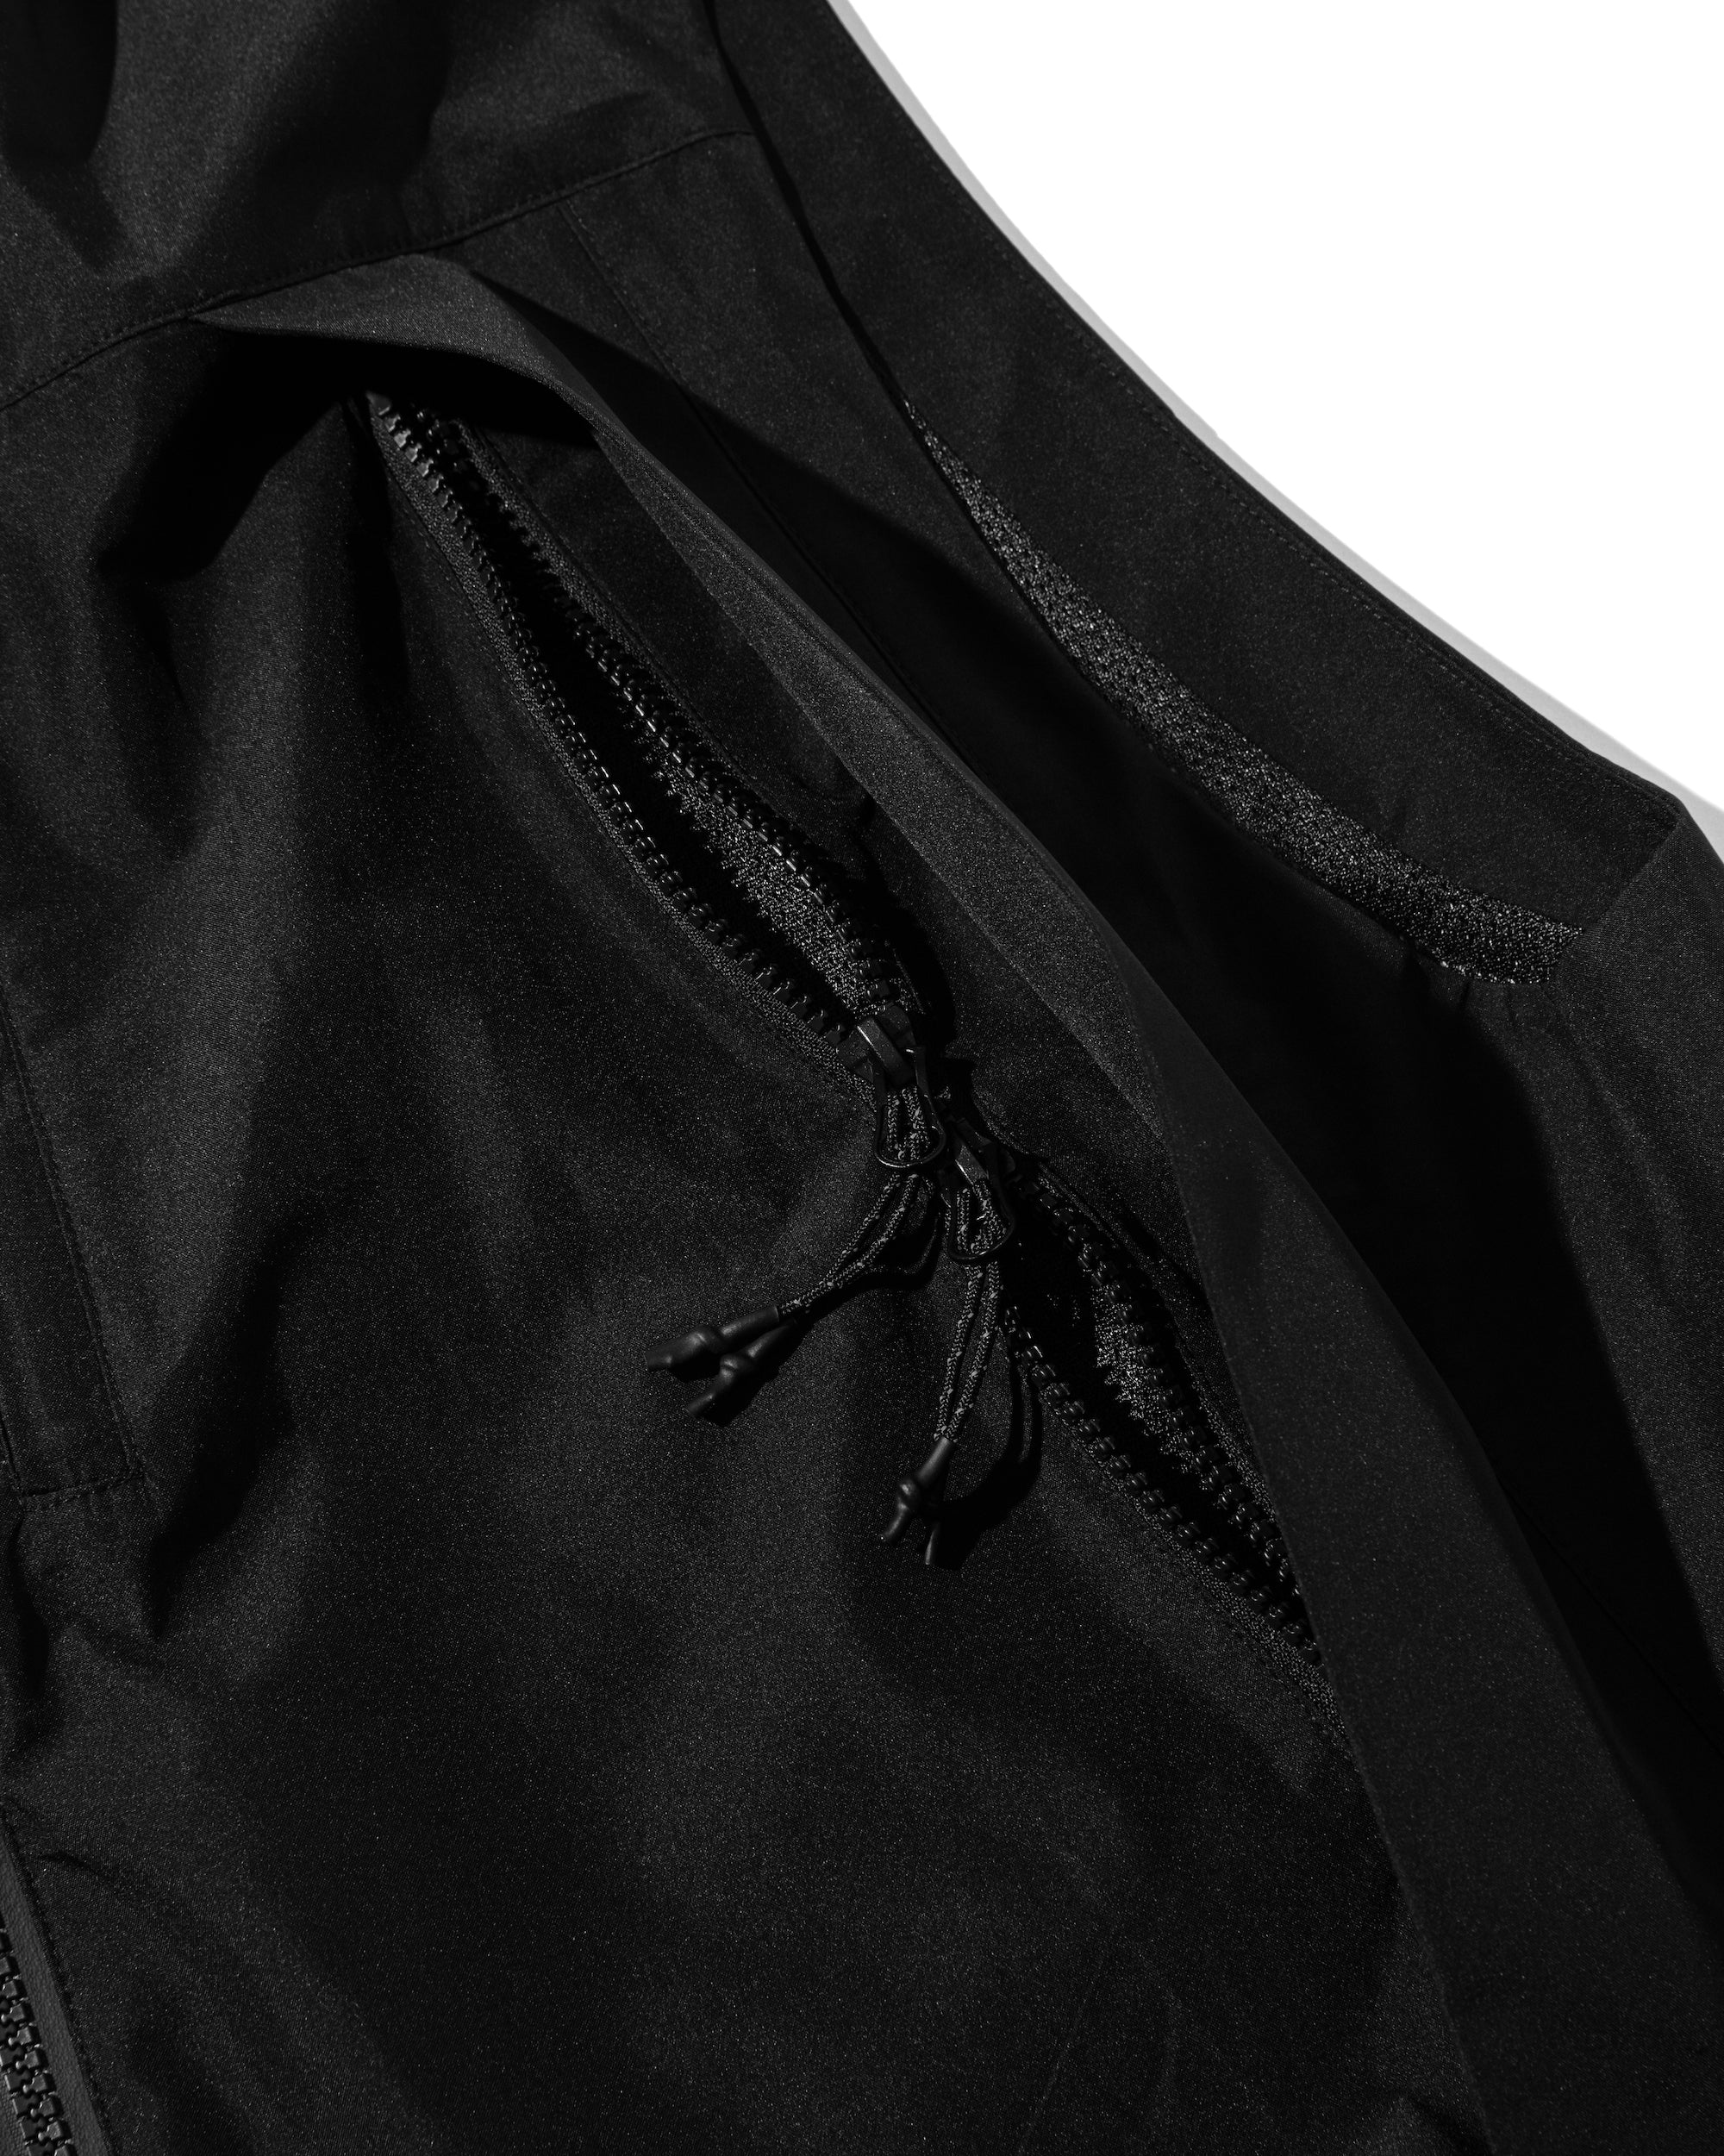 【5.1 WED 20:00- In stock】+phenix WINDSTOPPER® by GORE-TEX LABS CITY VEST